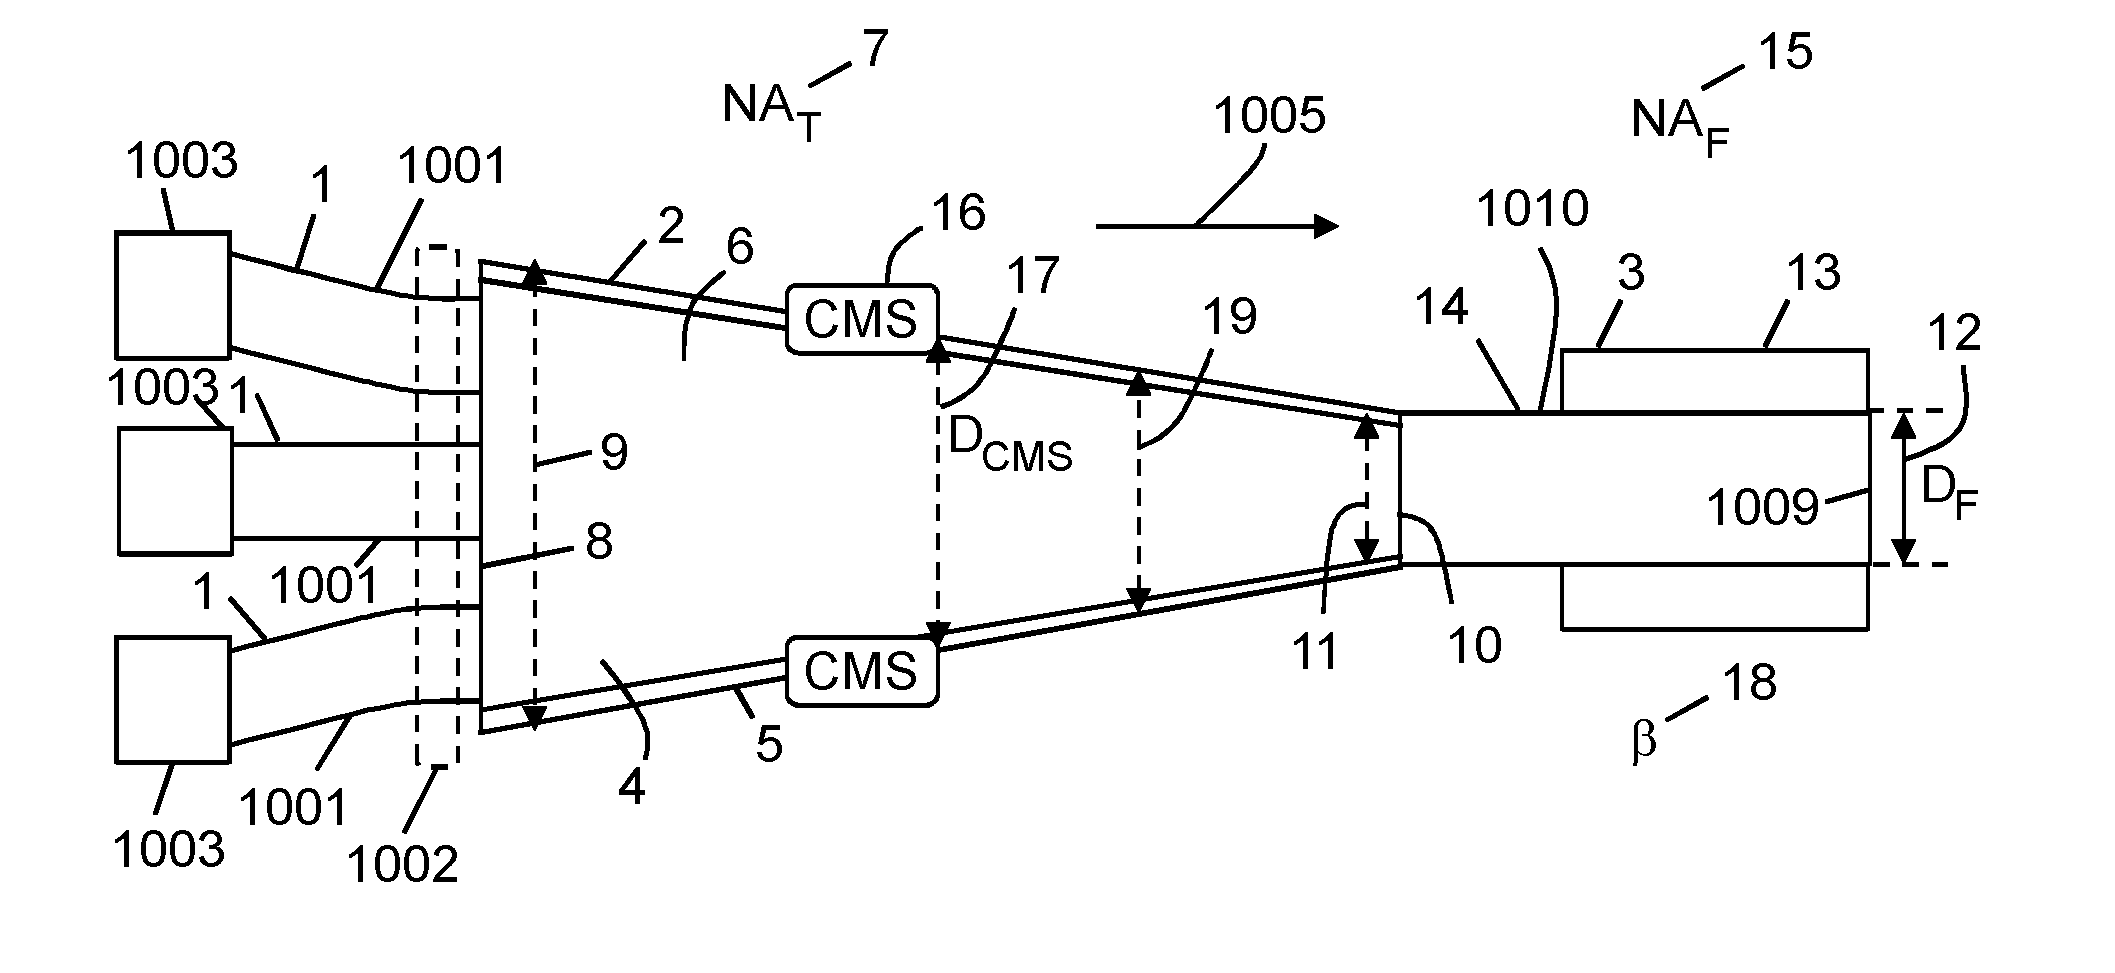 Apparatus for combining optical radiation